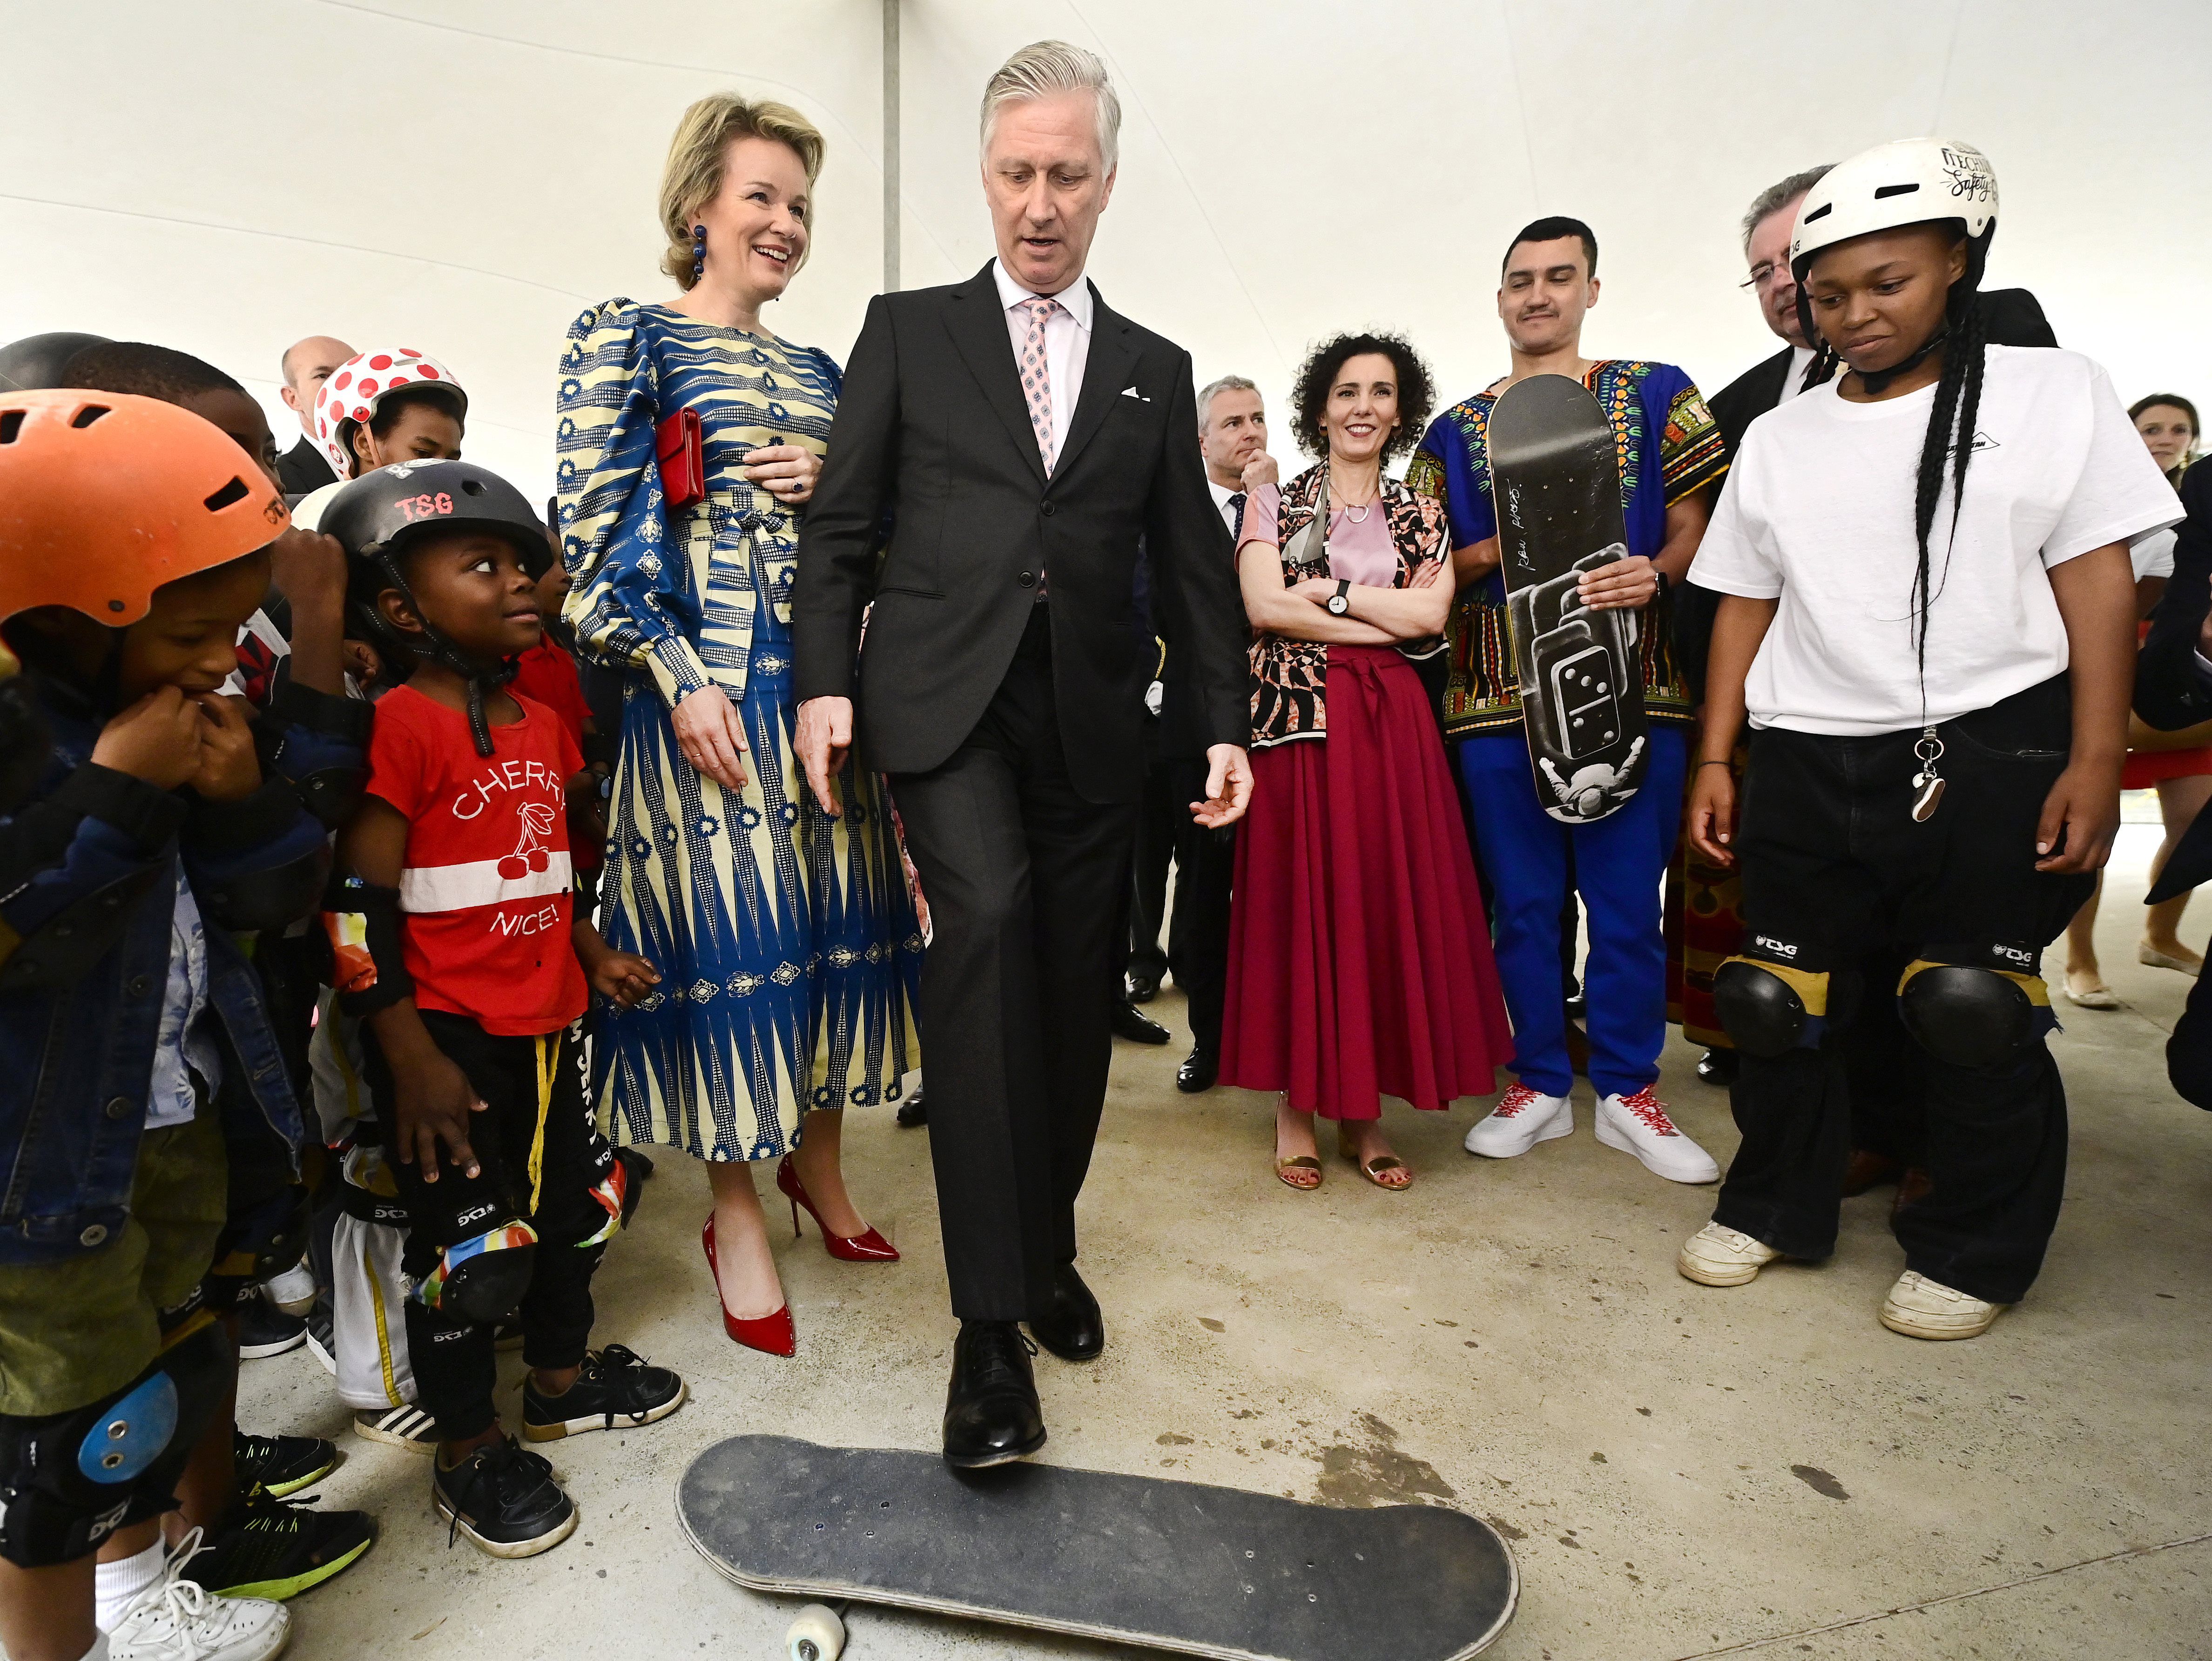 SOWETO, SOUTH AFRICA - MARCH 24 : State Visit of King Philippe and Queen Mathilde to South Africa (Day 3) - Queen Mathilde visits of the Emuseni day Care Centre (CECD) - King Philippe & Queen Mathilde visit the Hector Pieterson Museum in Soweto - King Philippe & Queen Mathilde visit the Skateistan's skate school - King Philippe & Queen Mathilde visit Beka-Shreder (solar pole production line, fiberglass pole production line) - Return event hosted by King Philippe & Queen Mathilde in honor of Matamela Cyril Ramaphosa President of South Africa on 24, 2023 in Soweto, South Africa, 24/03/2023 ( Photo by Didier Lebrun / Photonews